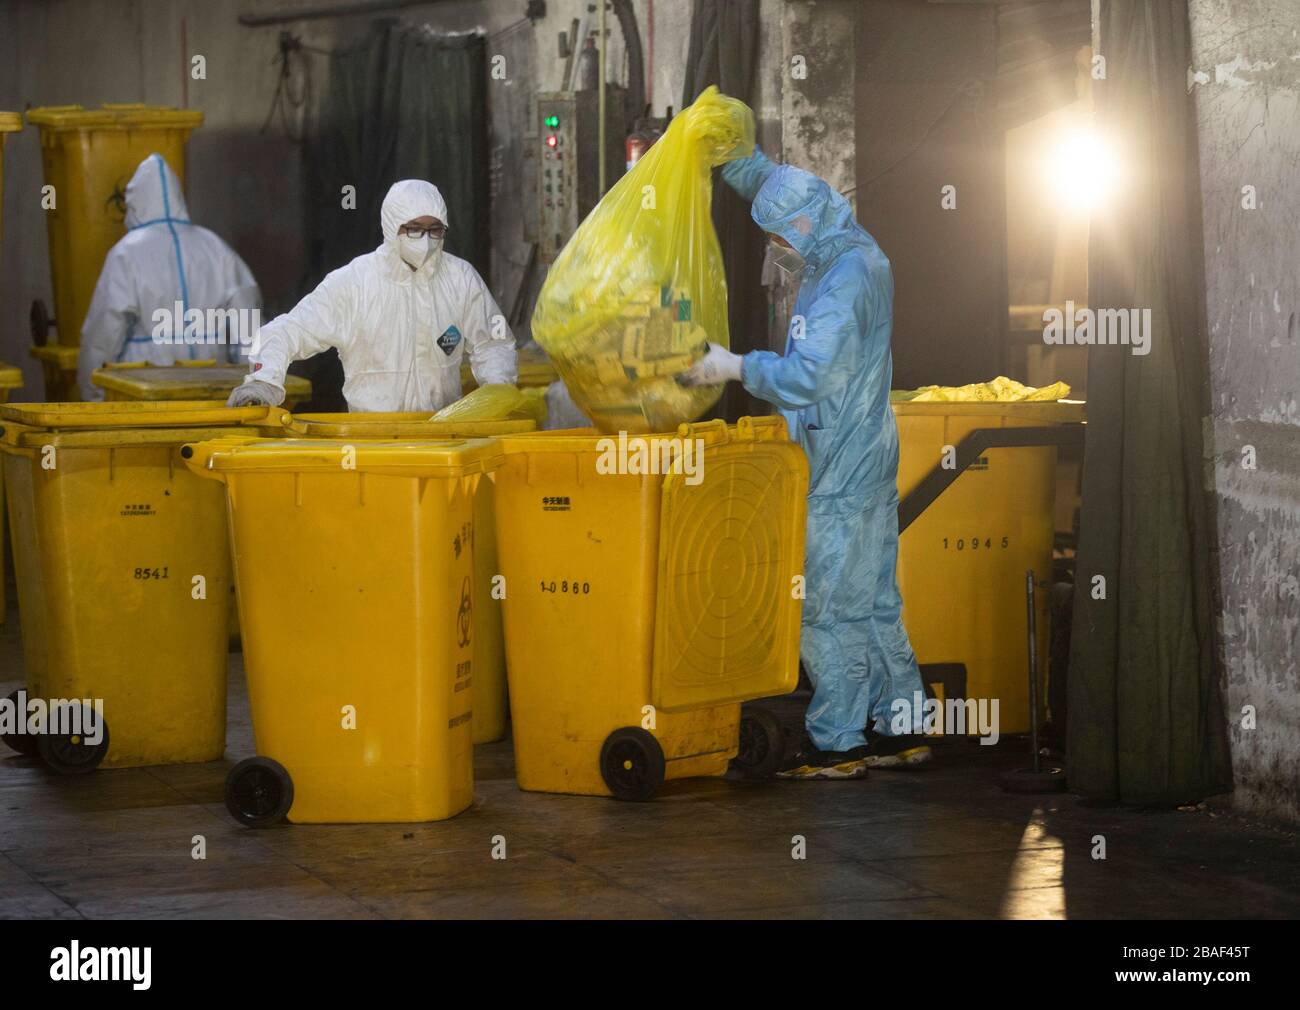 (200327) -- WUHAN, March 27, 2020 (Xinhua) -- Xia Shaohua (R), Wang Peng's colleague, takes out a bag of medical waste in Wuhan, central China's Hubei Province, March 26, 2020. Wang Peng, 35, has been working for the Wuhan Hanshi Environmental Engineering Company for 9 years, where he is responsible for the disposal and incineration of medical waste.Protection against infection is a major challenge that Wang and his coworkers face, as they work 12-hour shifts to cope with the surging workload during the COVID-19 outbreak. 'I like what I'm doing,' Wang said, 'I'm not only making money for my fa Stock Photo